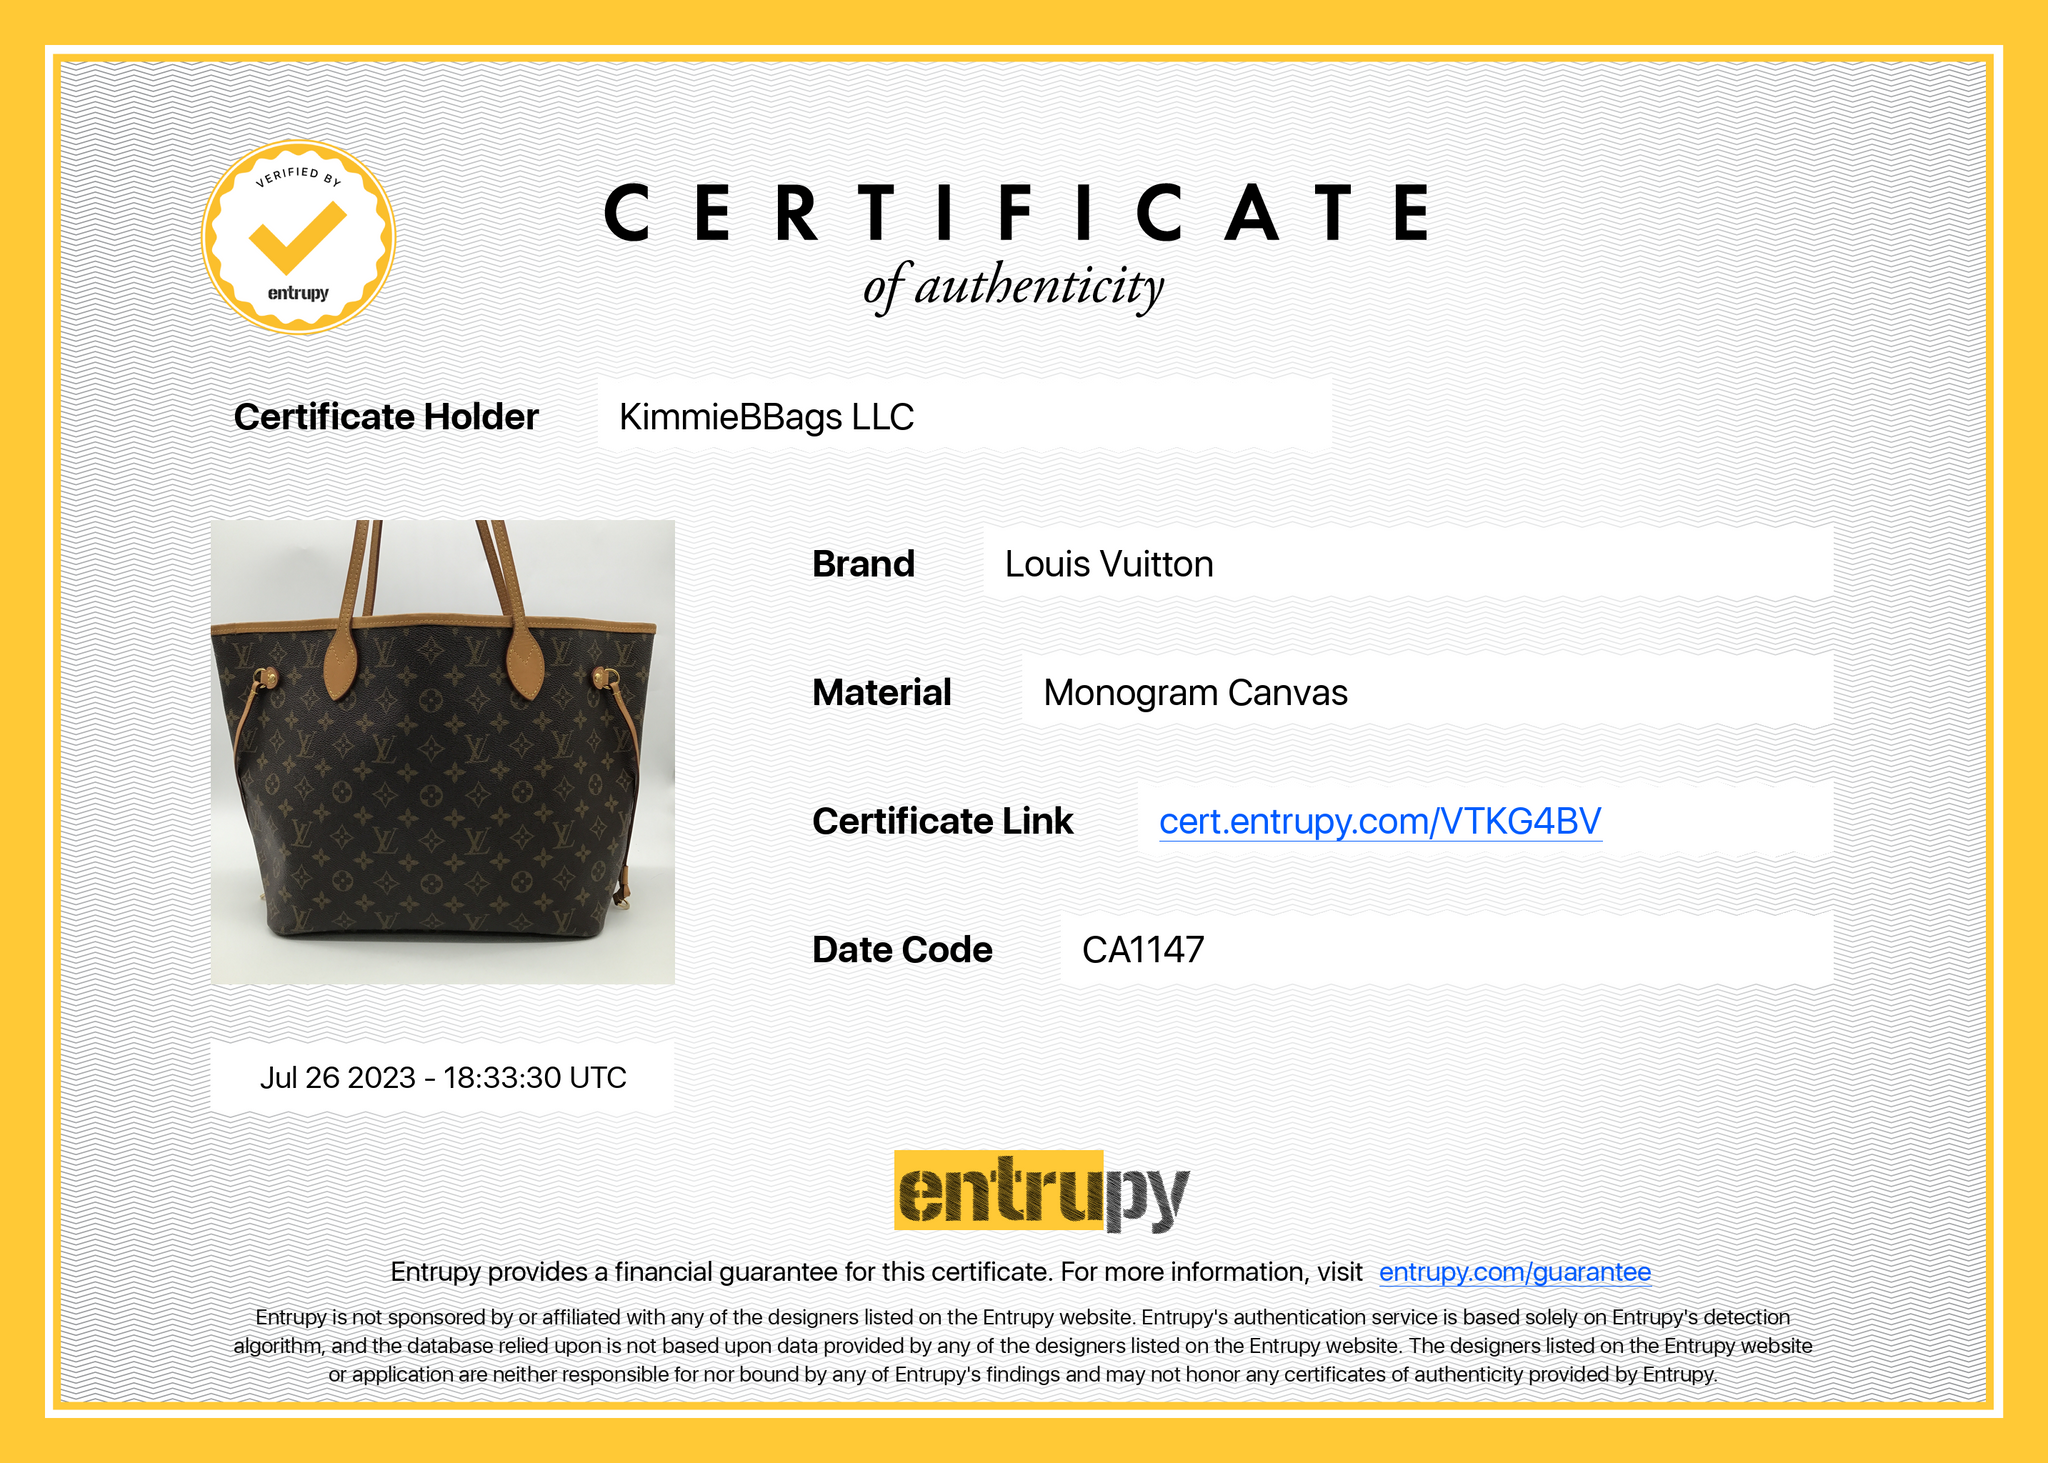 Authentic Louis Vuitton neverfull pouch for Sale in Hialeah, FL